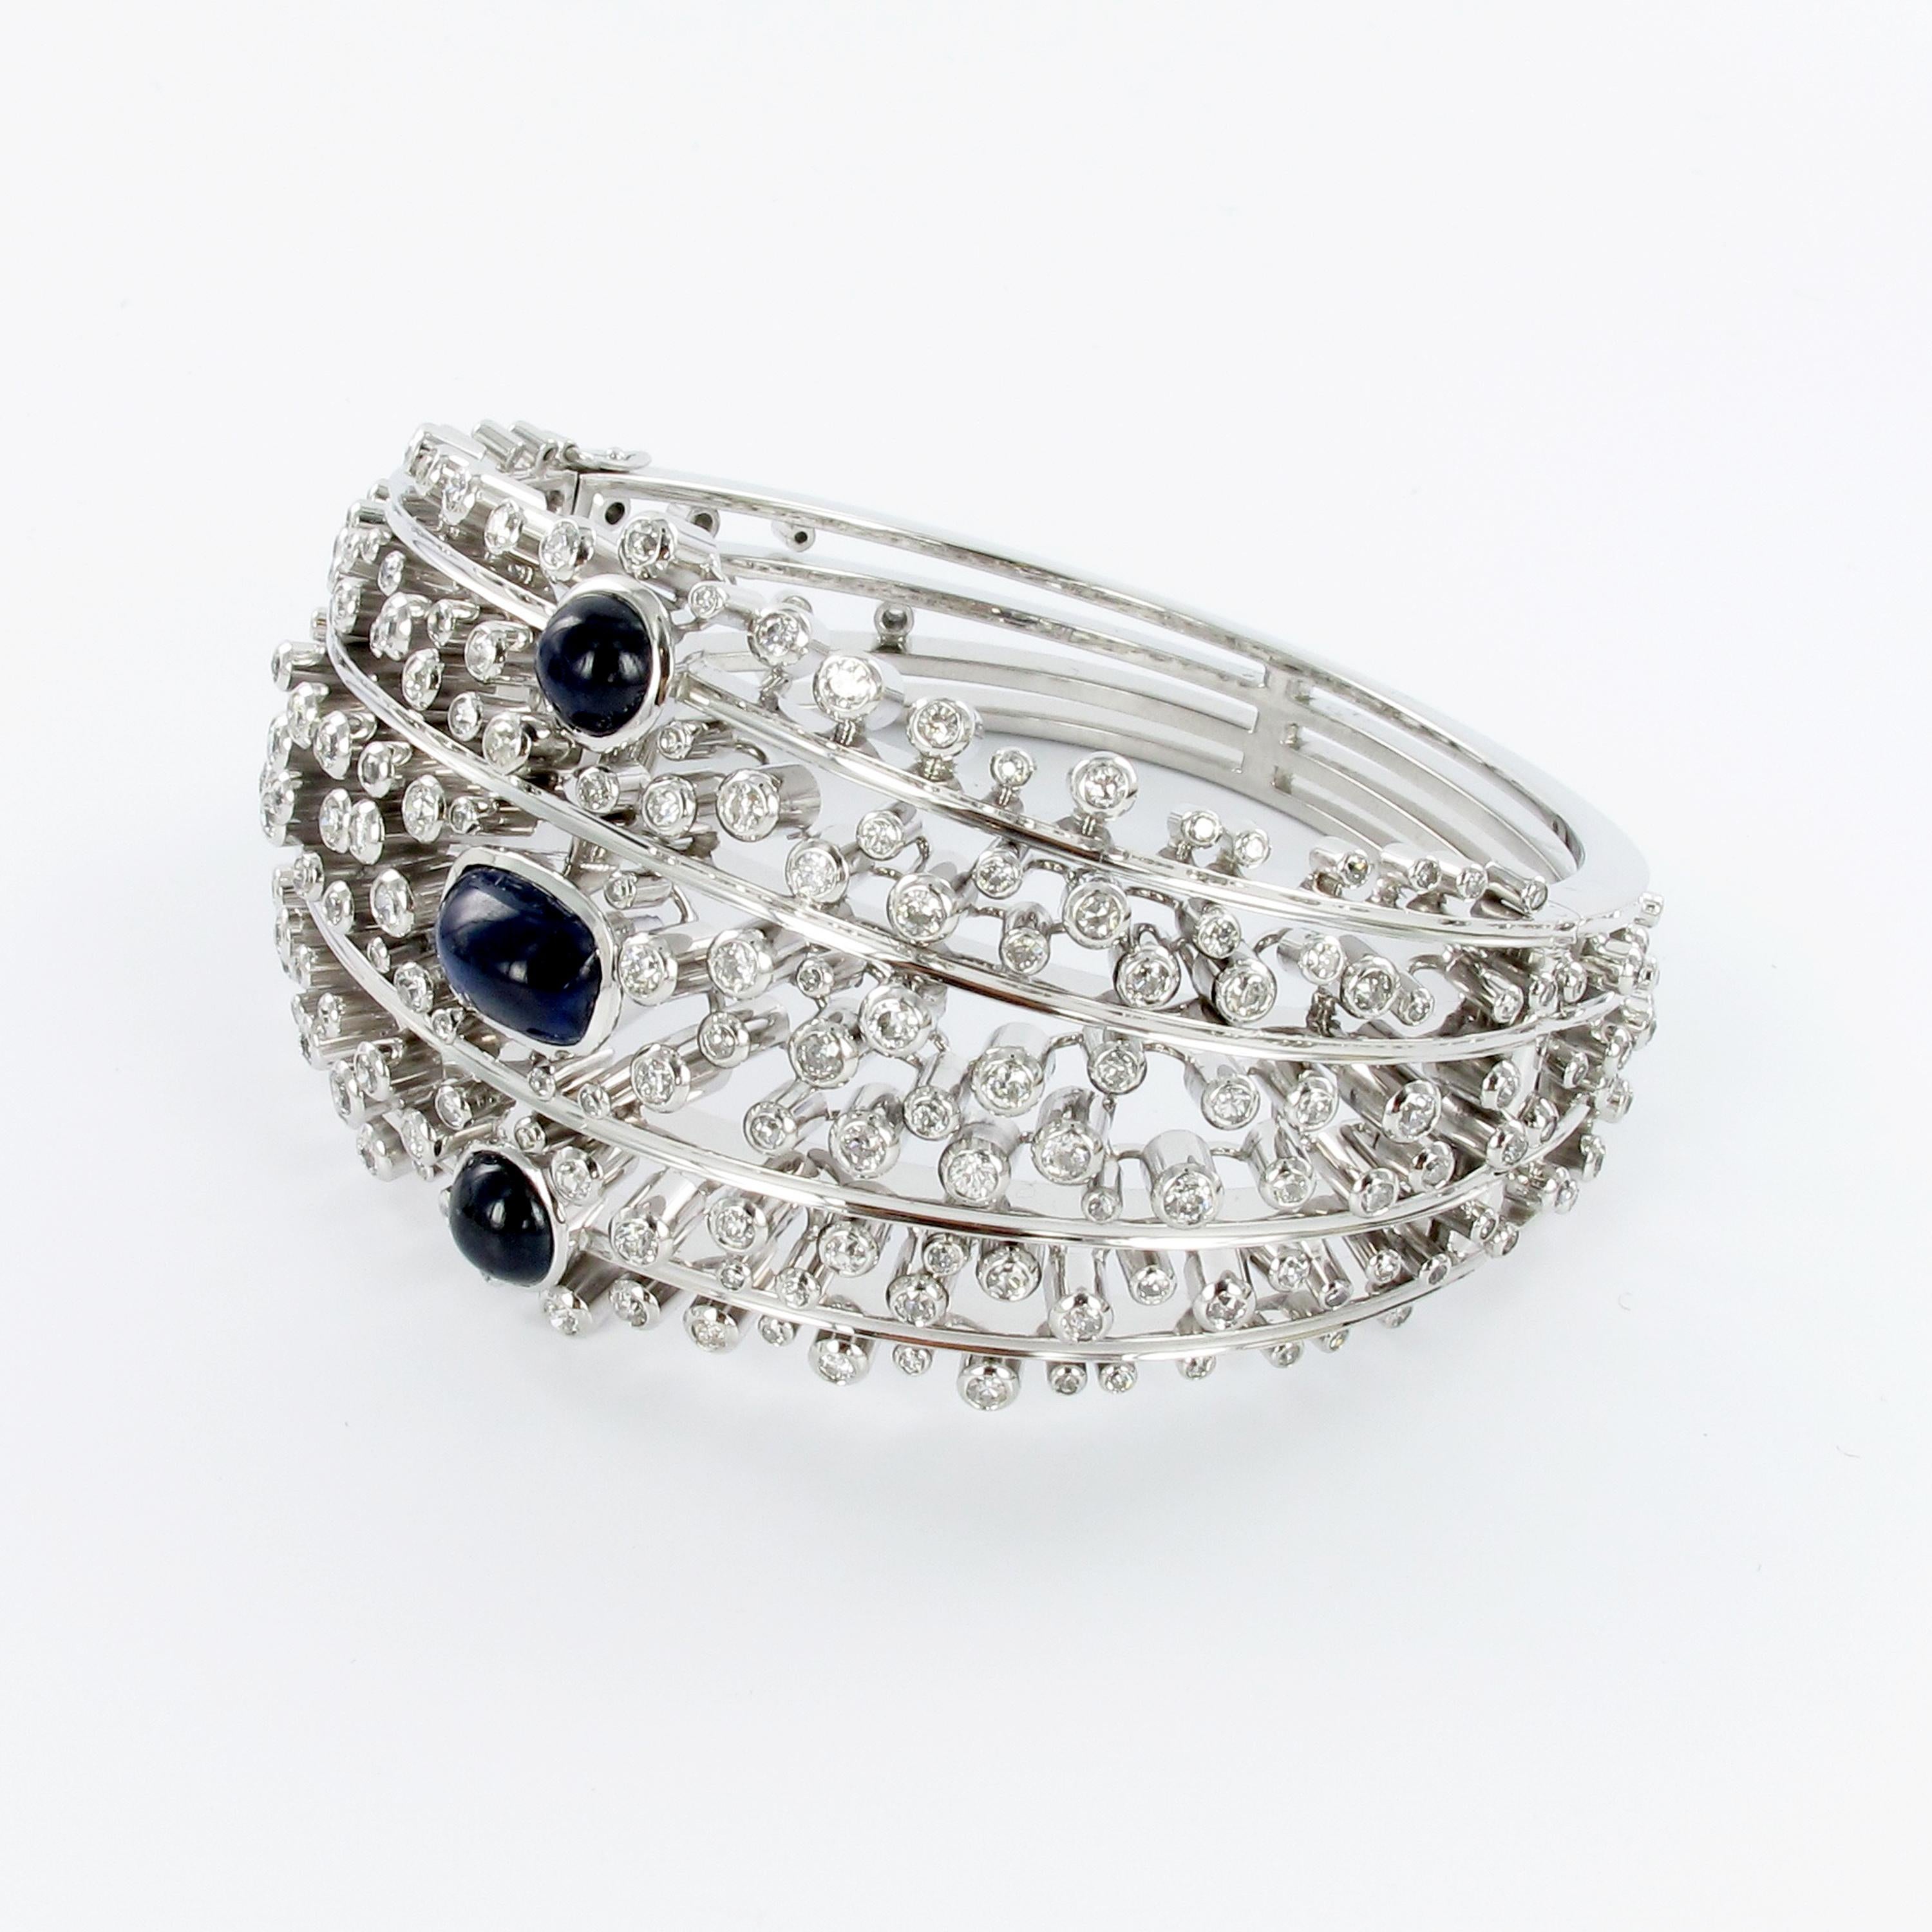 Charming dome shaped bangle in 18K white gold. Set in one line with 3 cabochon cut sapphires totaling approx. 4.00 carats. Further bezel-set with 214 brilliant-cut diamonds of G/H-vs quality totaling 5.00 carats of weight. Box-clasp secured by two